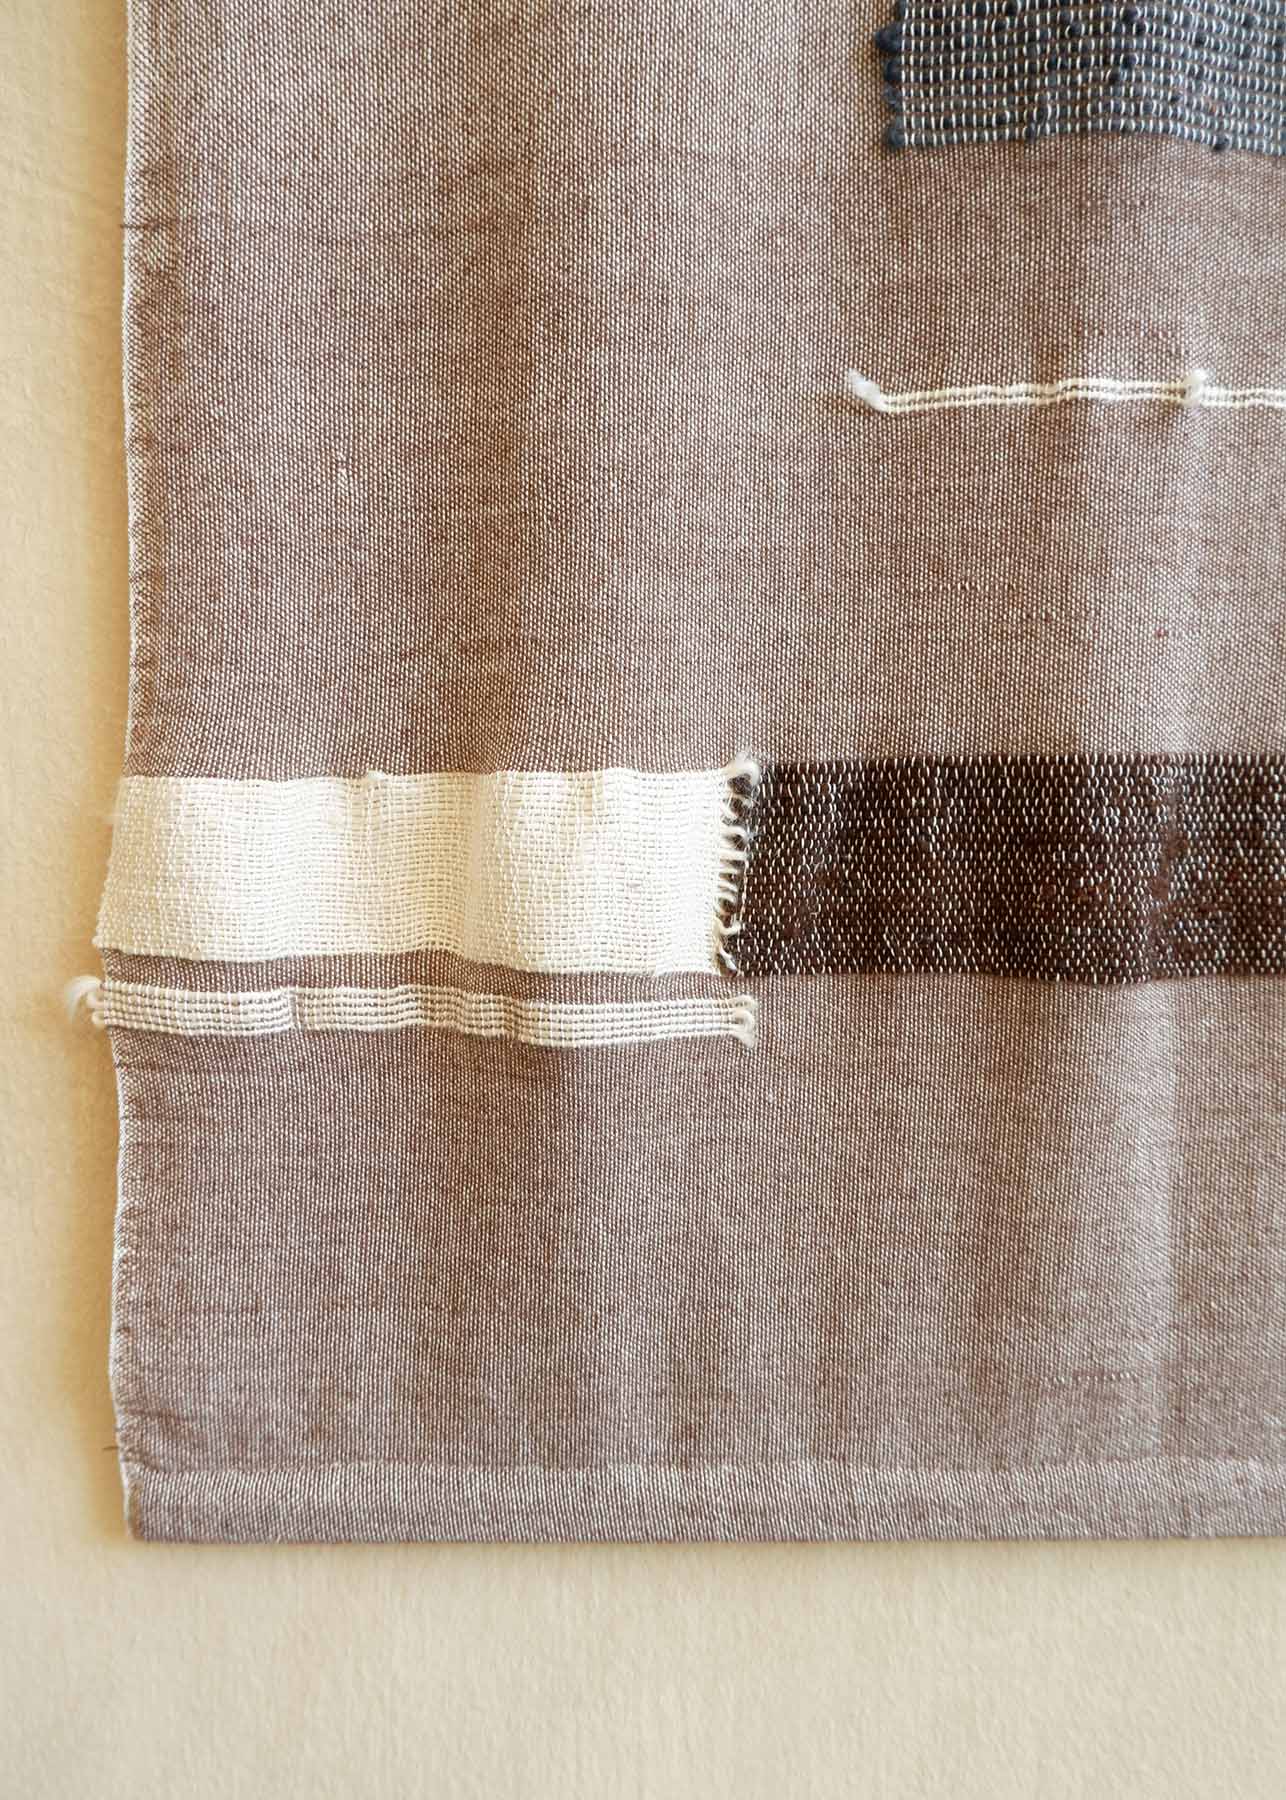 'Script' Original artwork handwoven by Leila Walter using Vintage & locally sourced wool, mohair & cotton